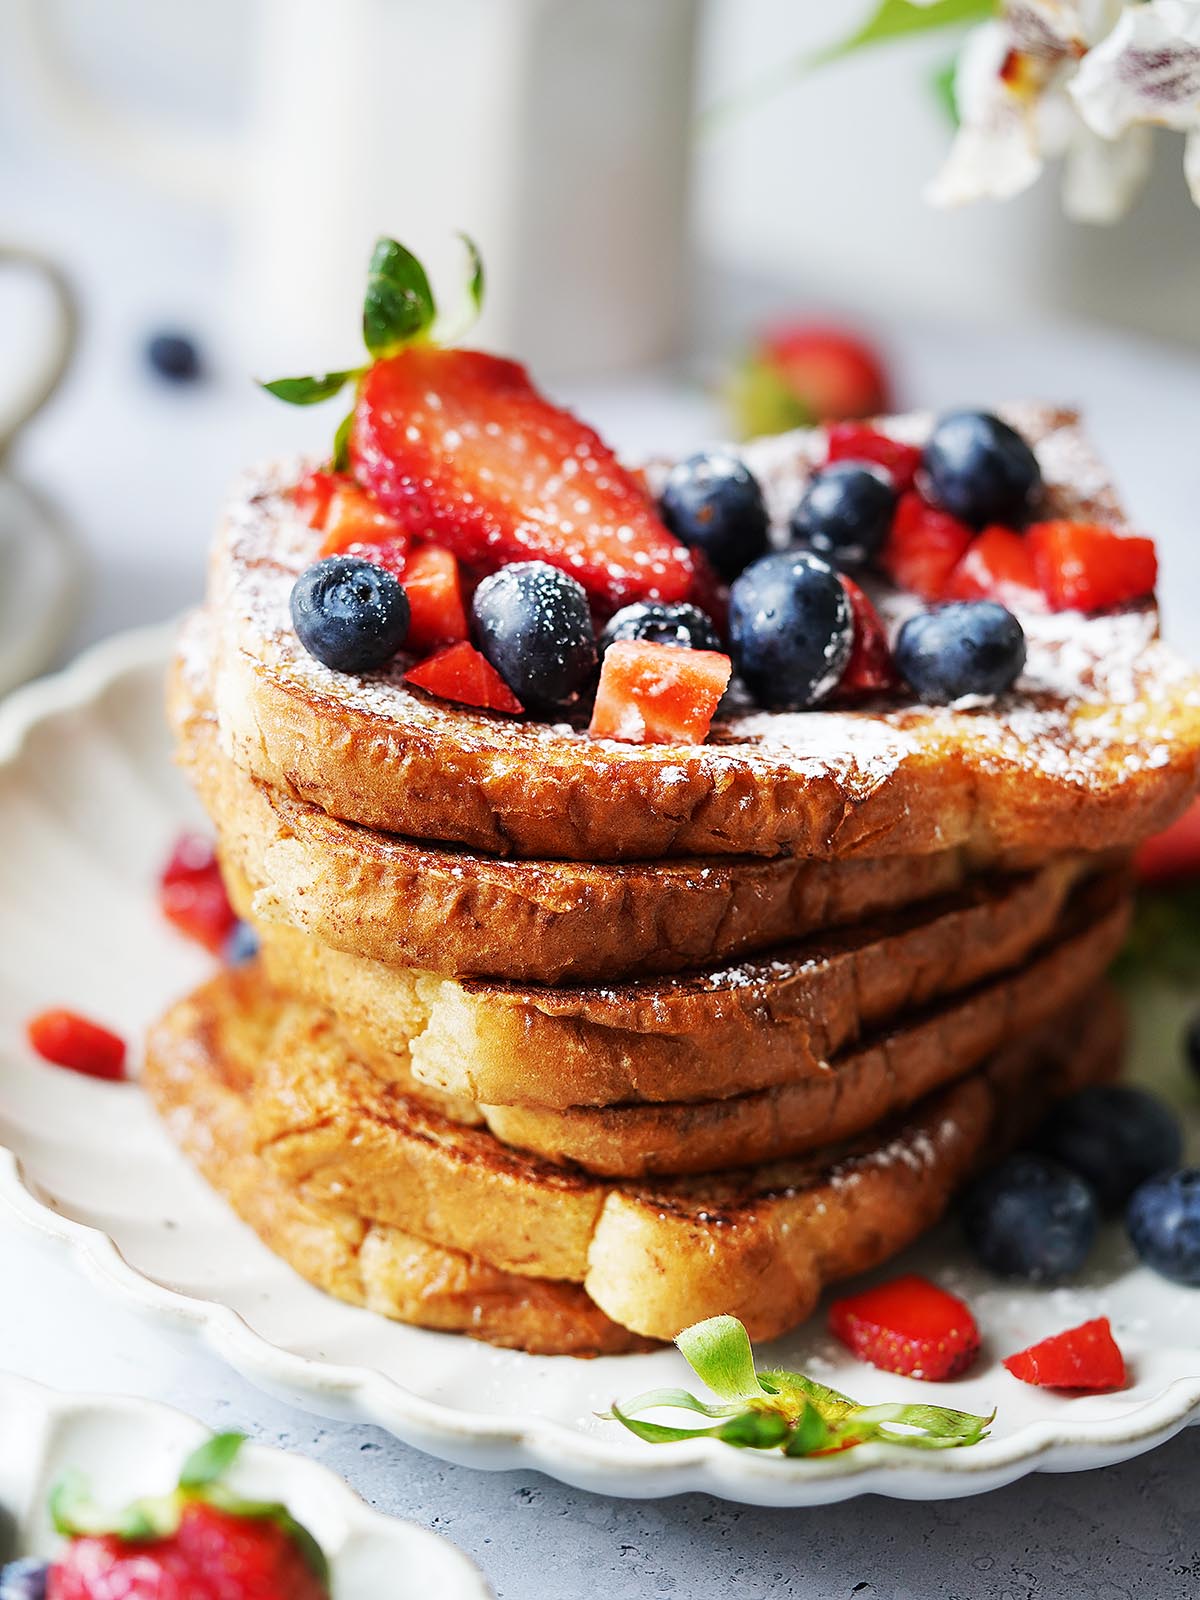 A stack of toast slices on a white plate topped with blueberries and strawberries.